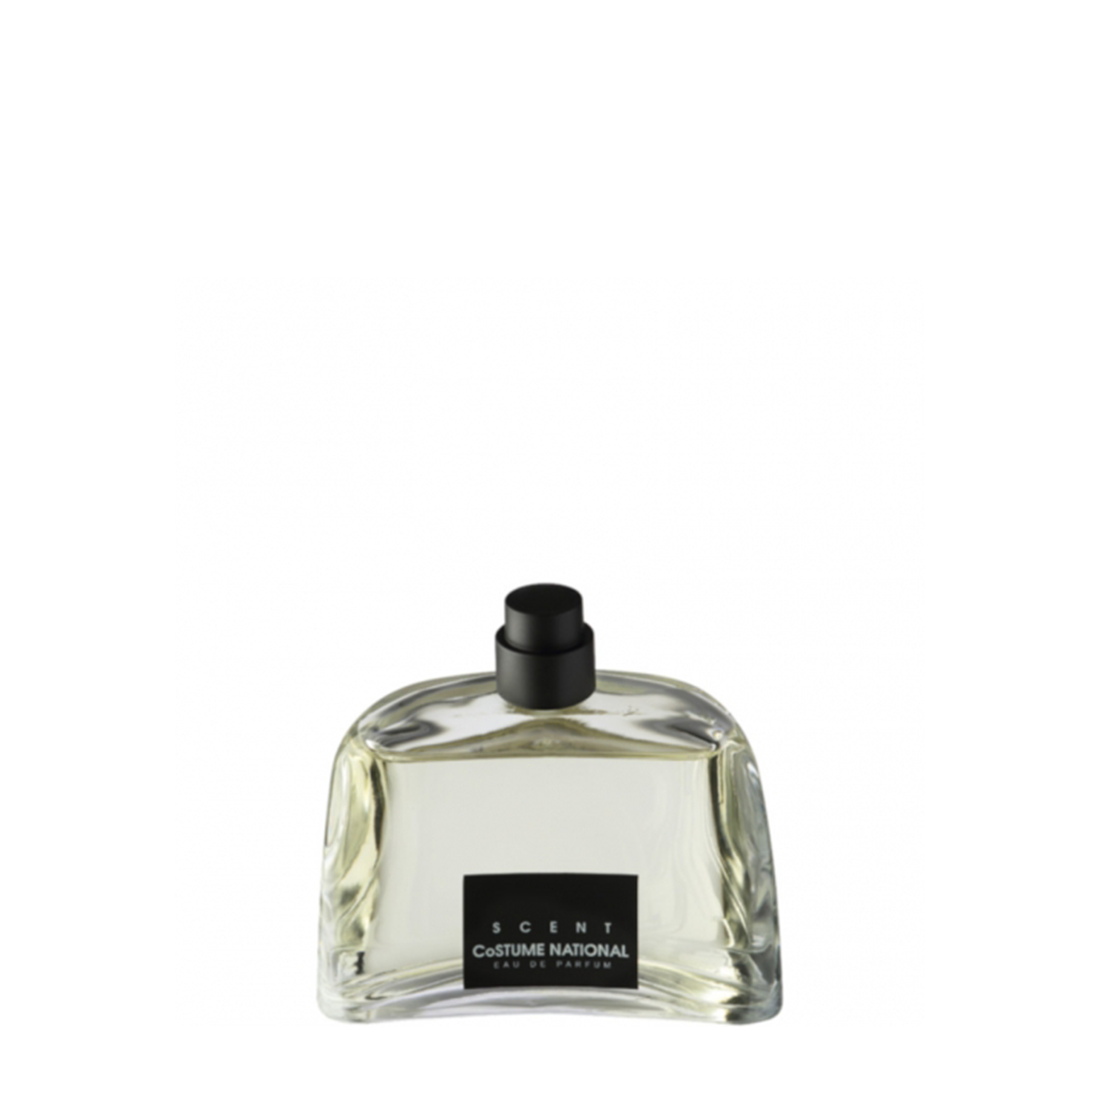 COSTUME NATIONAL SCENT